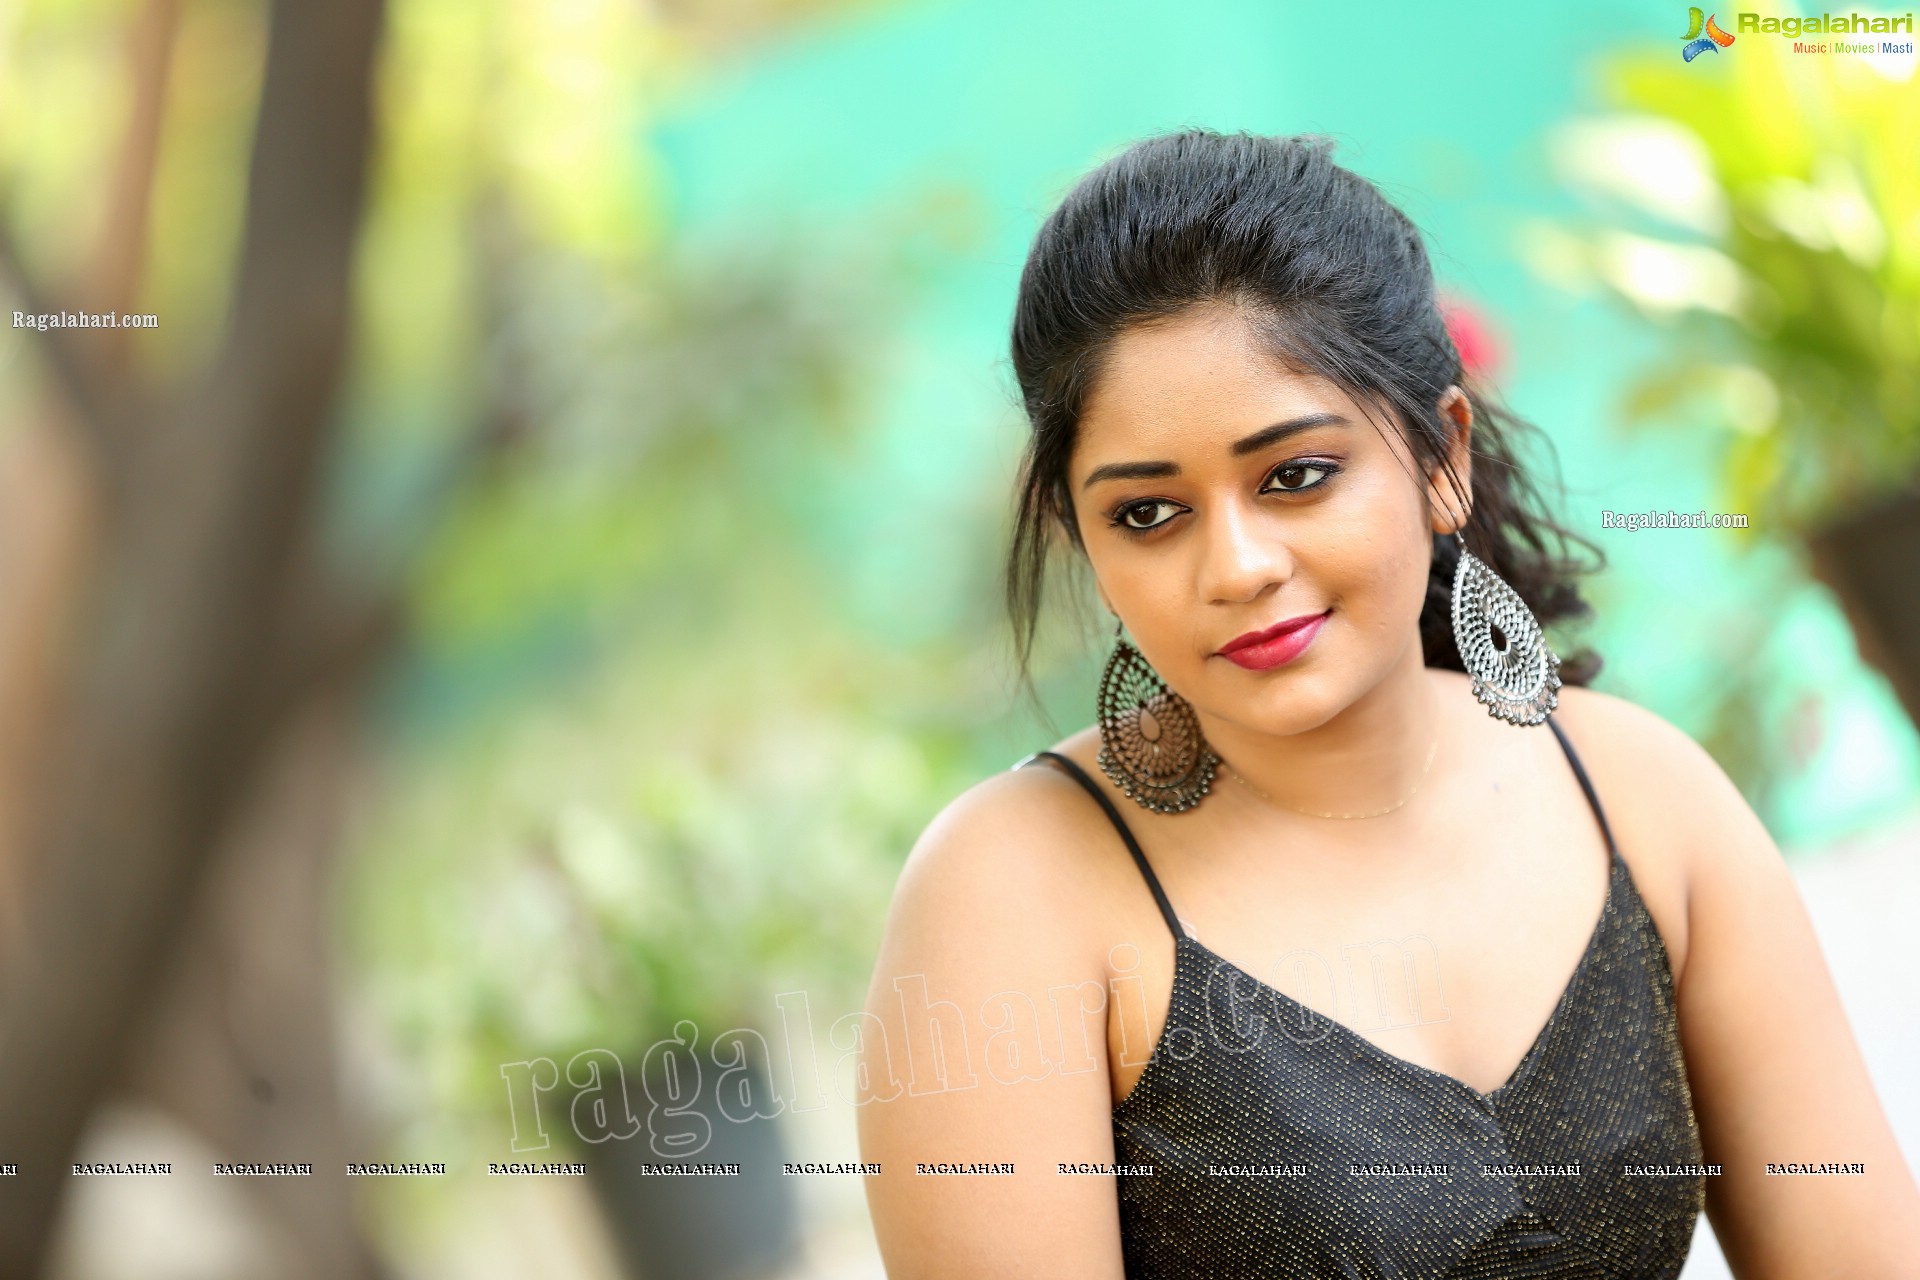 Deepa Umapathy in Black Silver Glittery Jumpsuit, Exclusive Photo Shoot